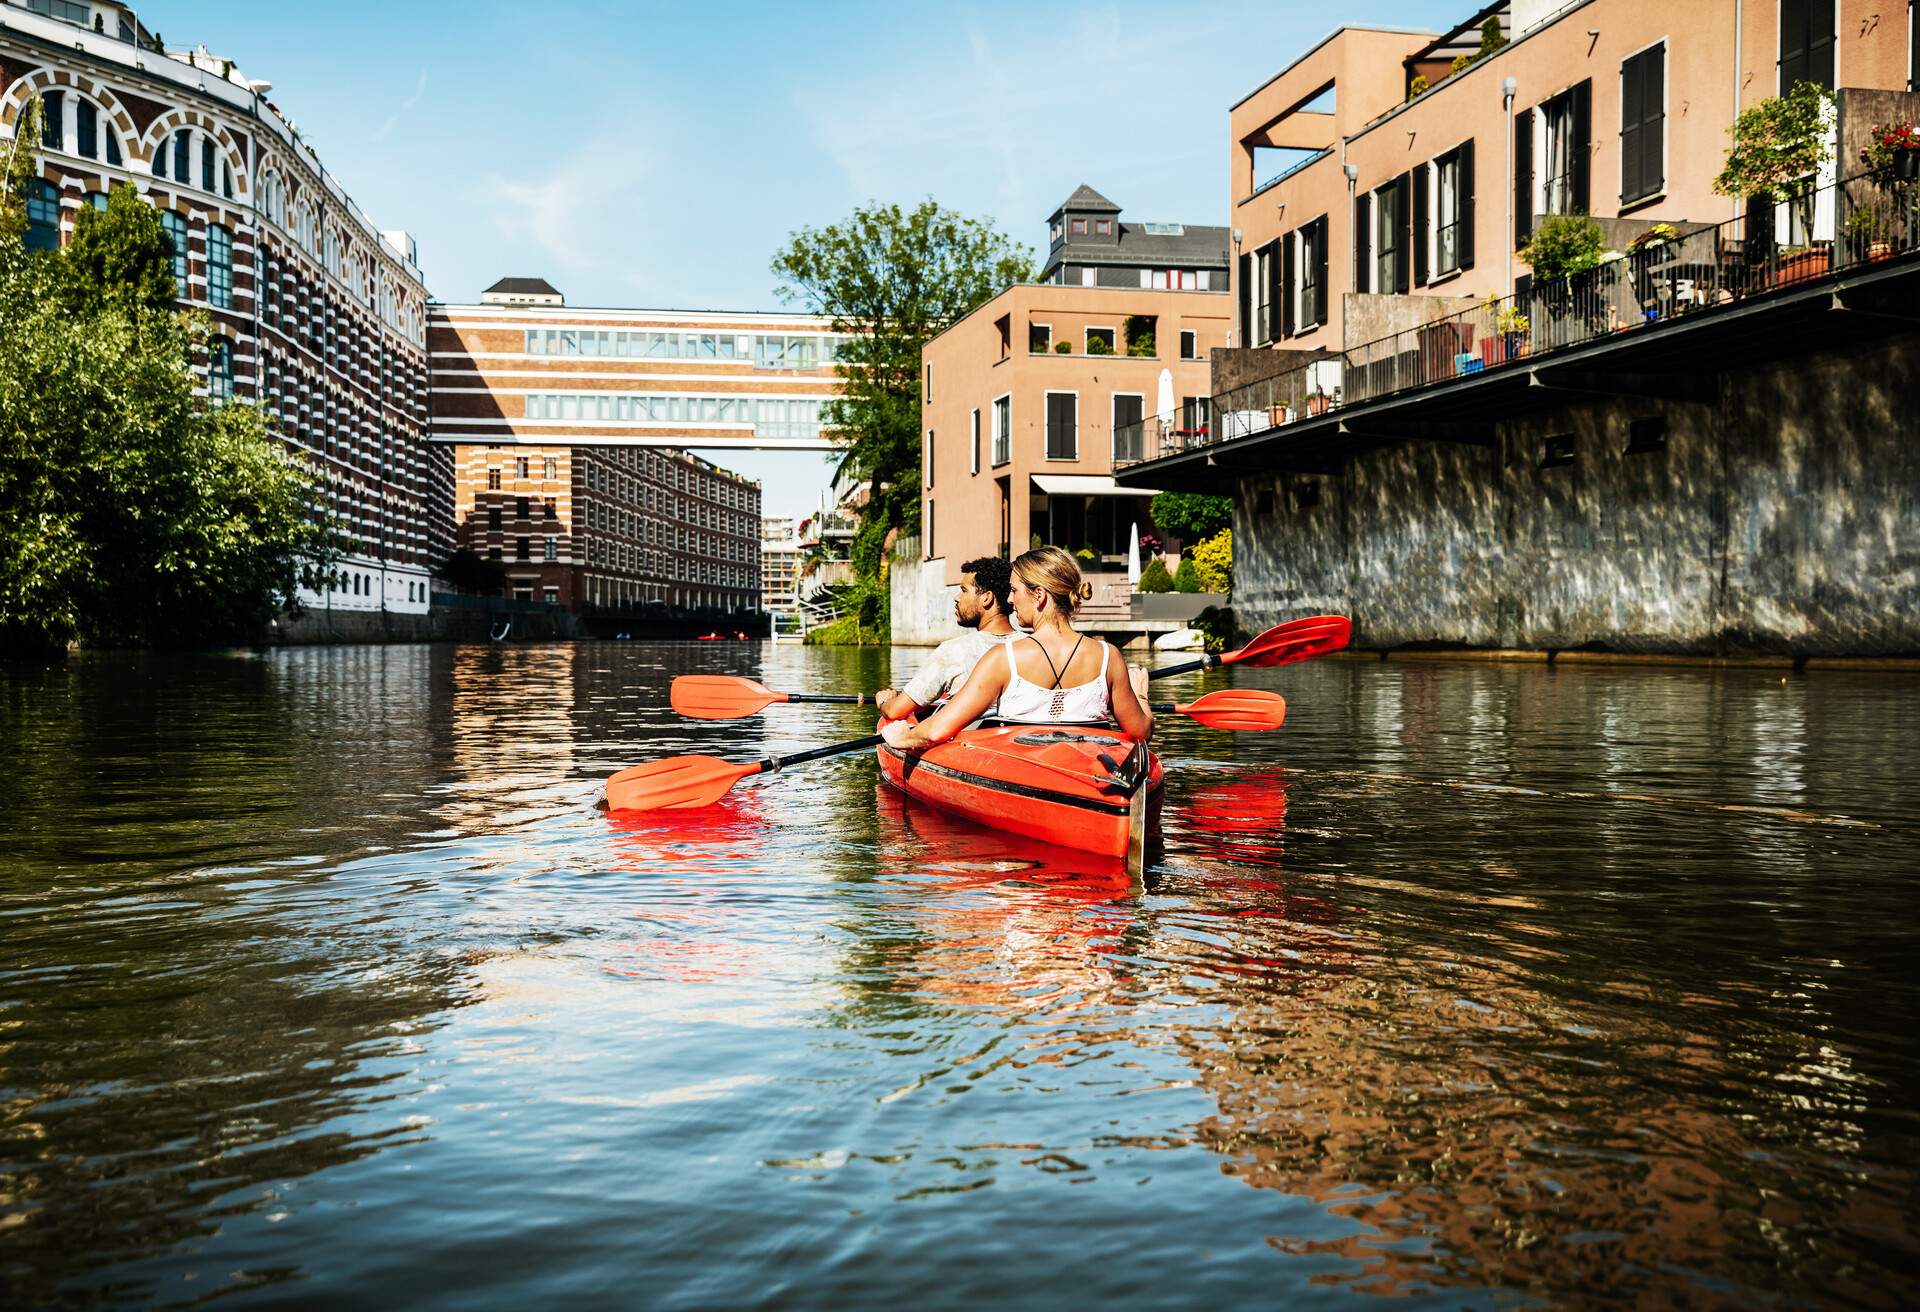 A couple are exploring the inner city canals, paddling in a kayak together.